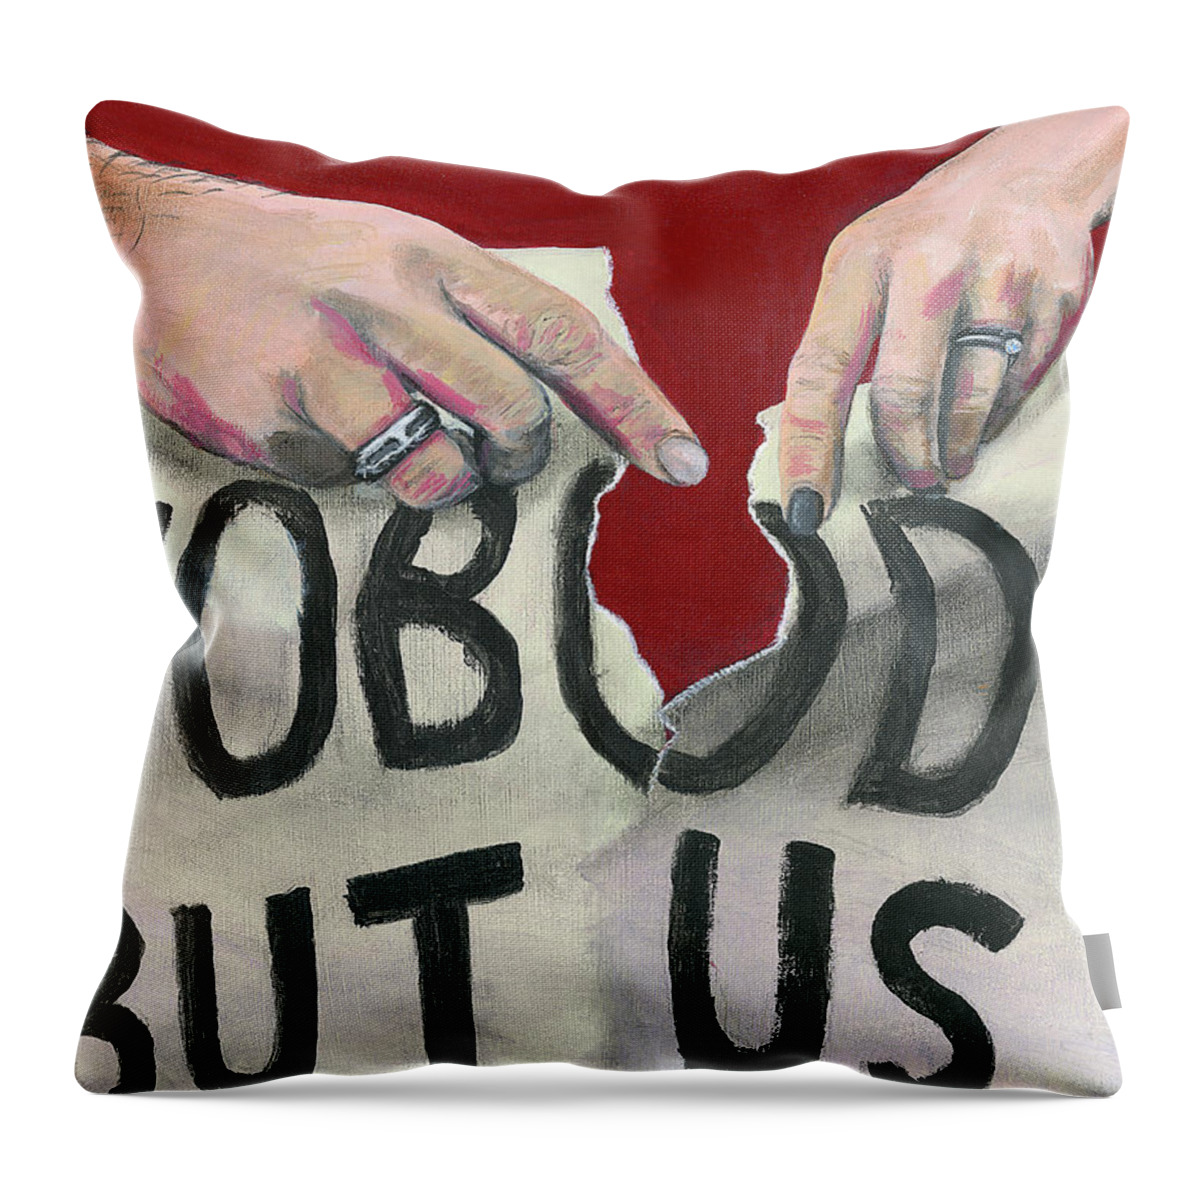 Hands Throw Pillow featuring the painting Nobody But Us by Matthew Mezo